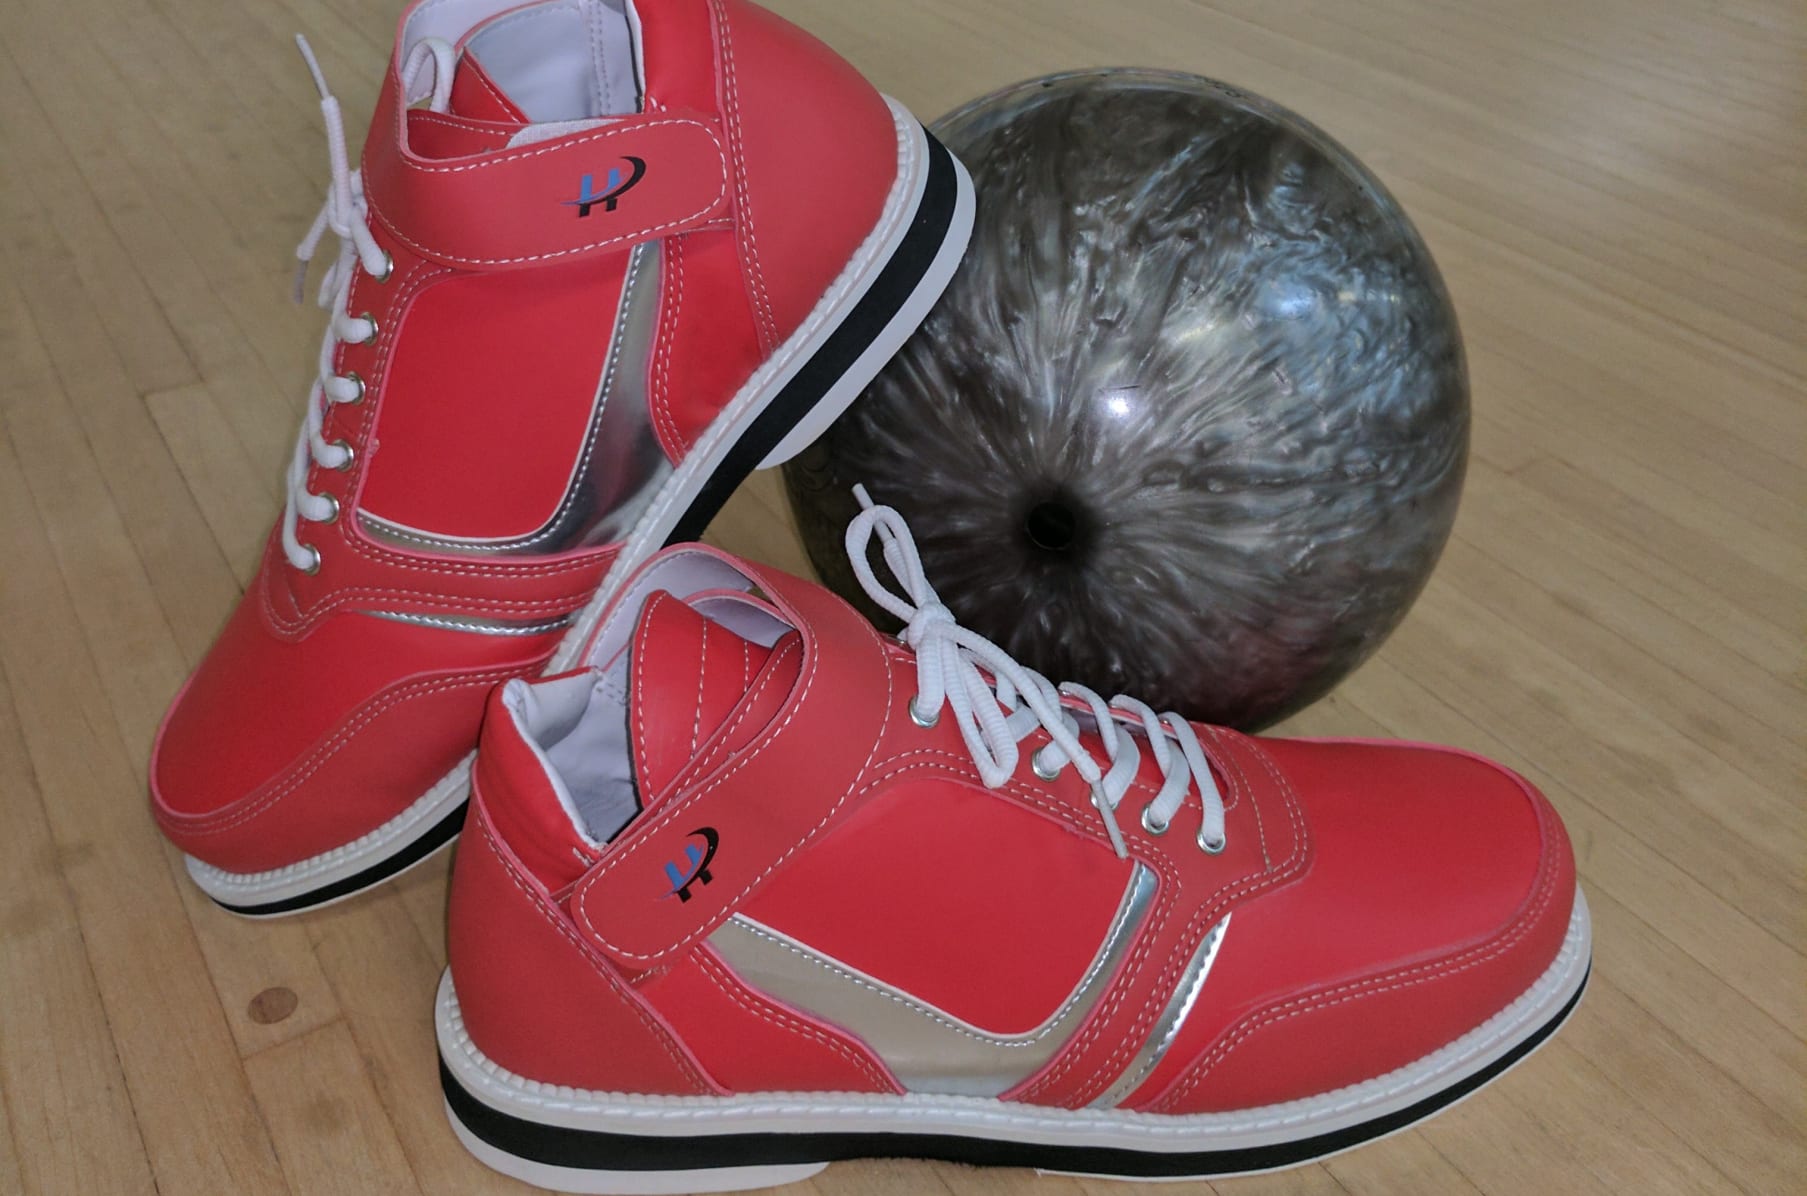 High Top Bowling Shoes | Indiegogo